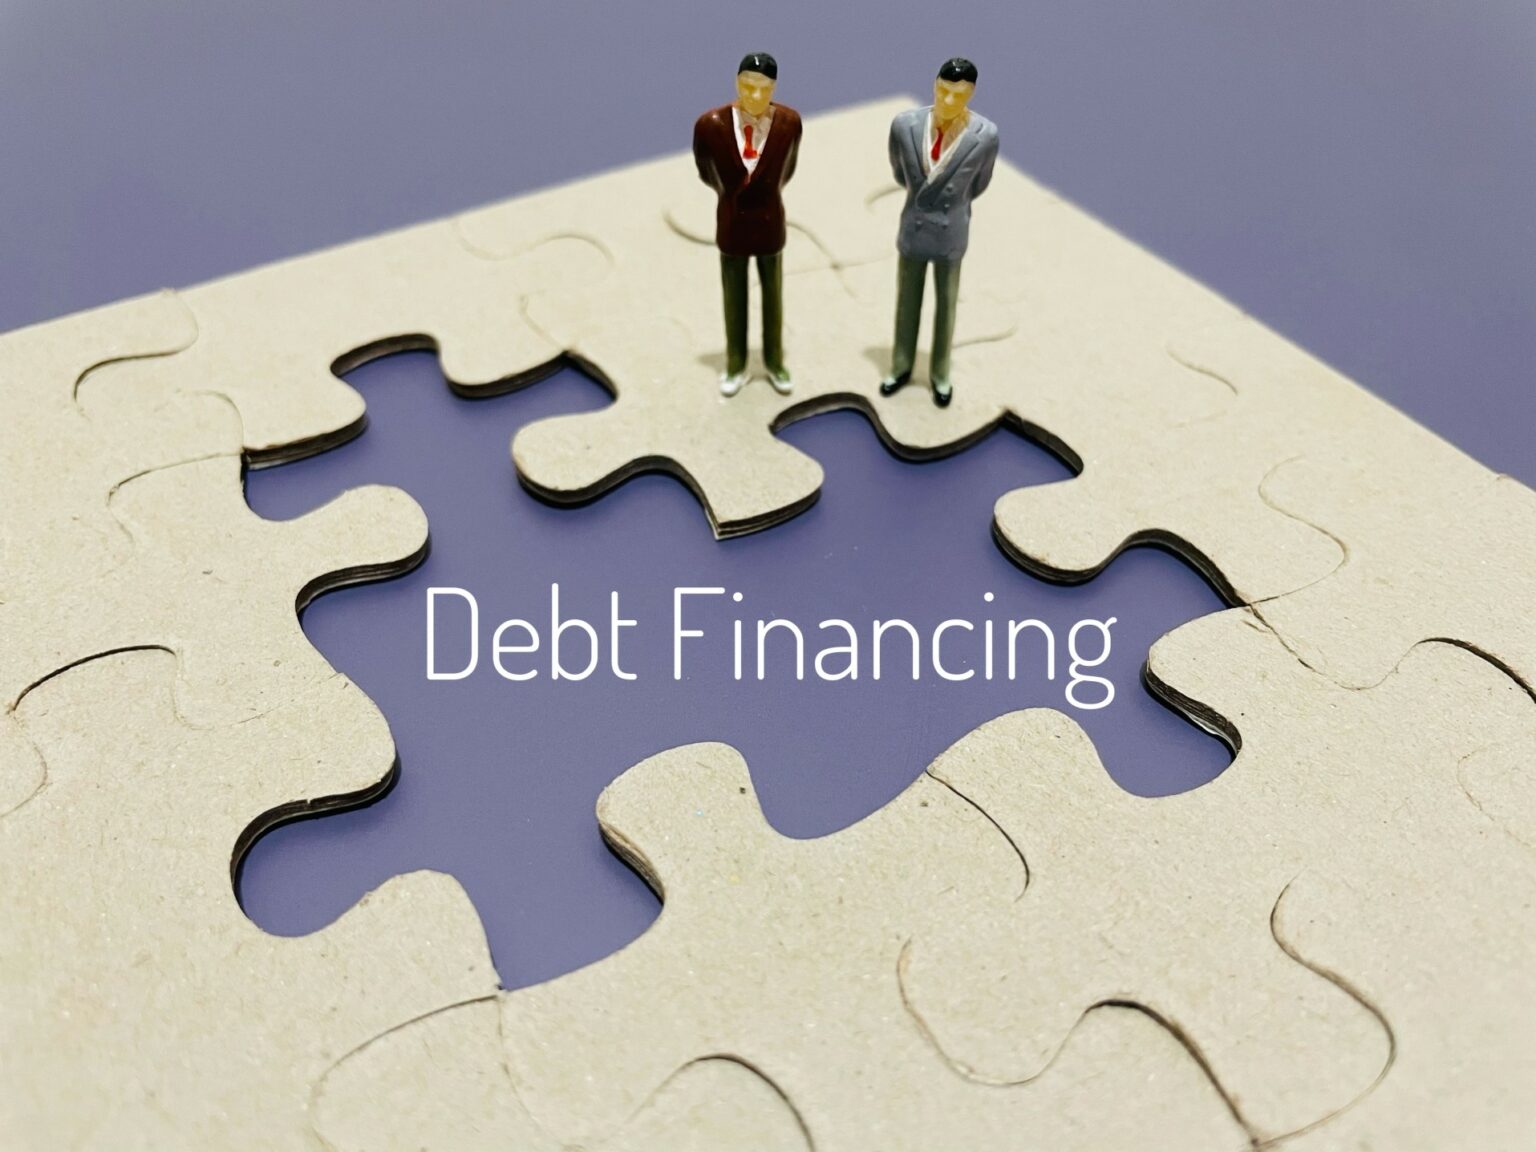 The Ultimate Debt Financing Guide